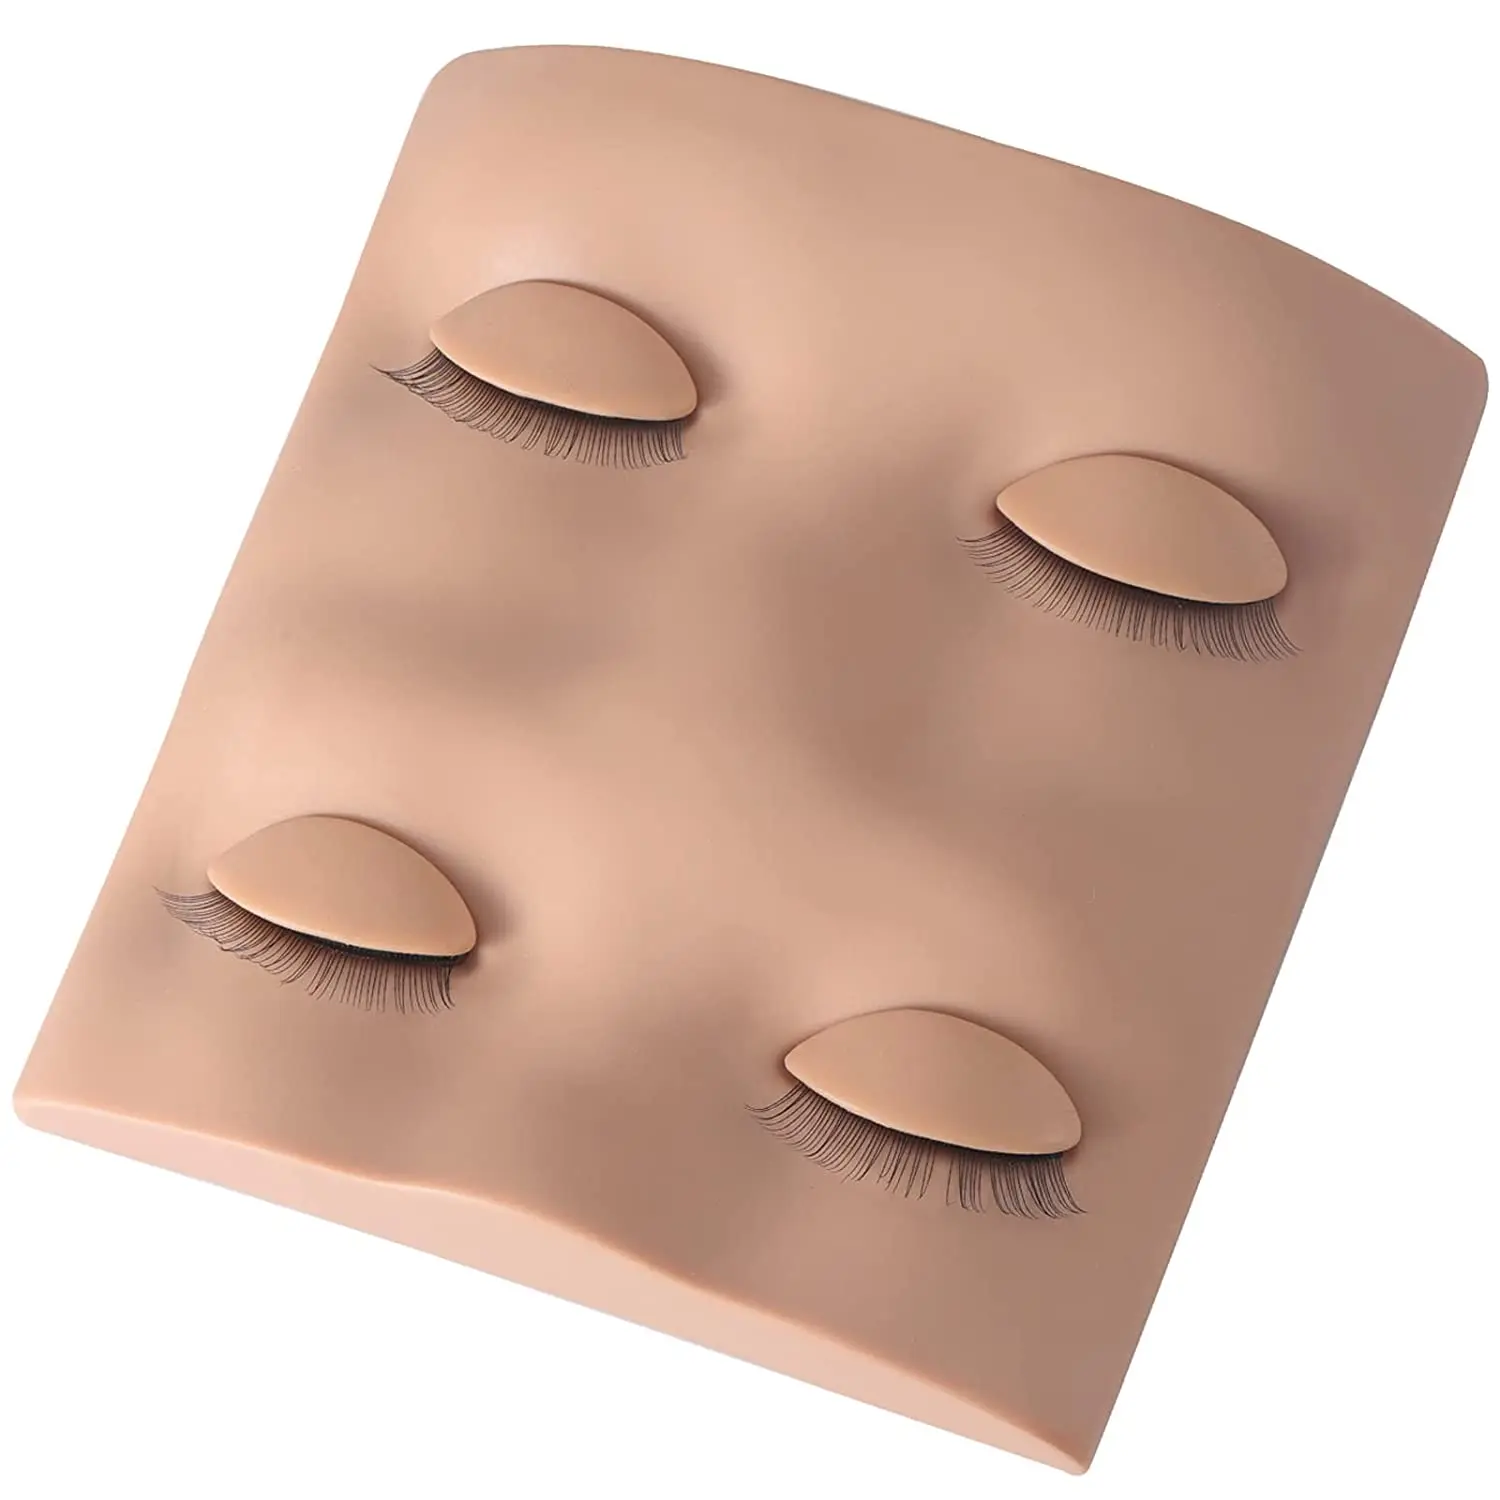 New Silicone Head Mannequin with Removable Eyes Practice Head Model For Eyelash Extension Training Mannequin Head